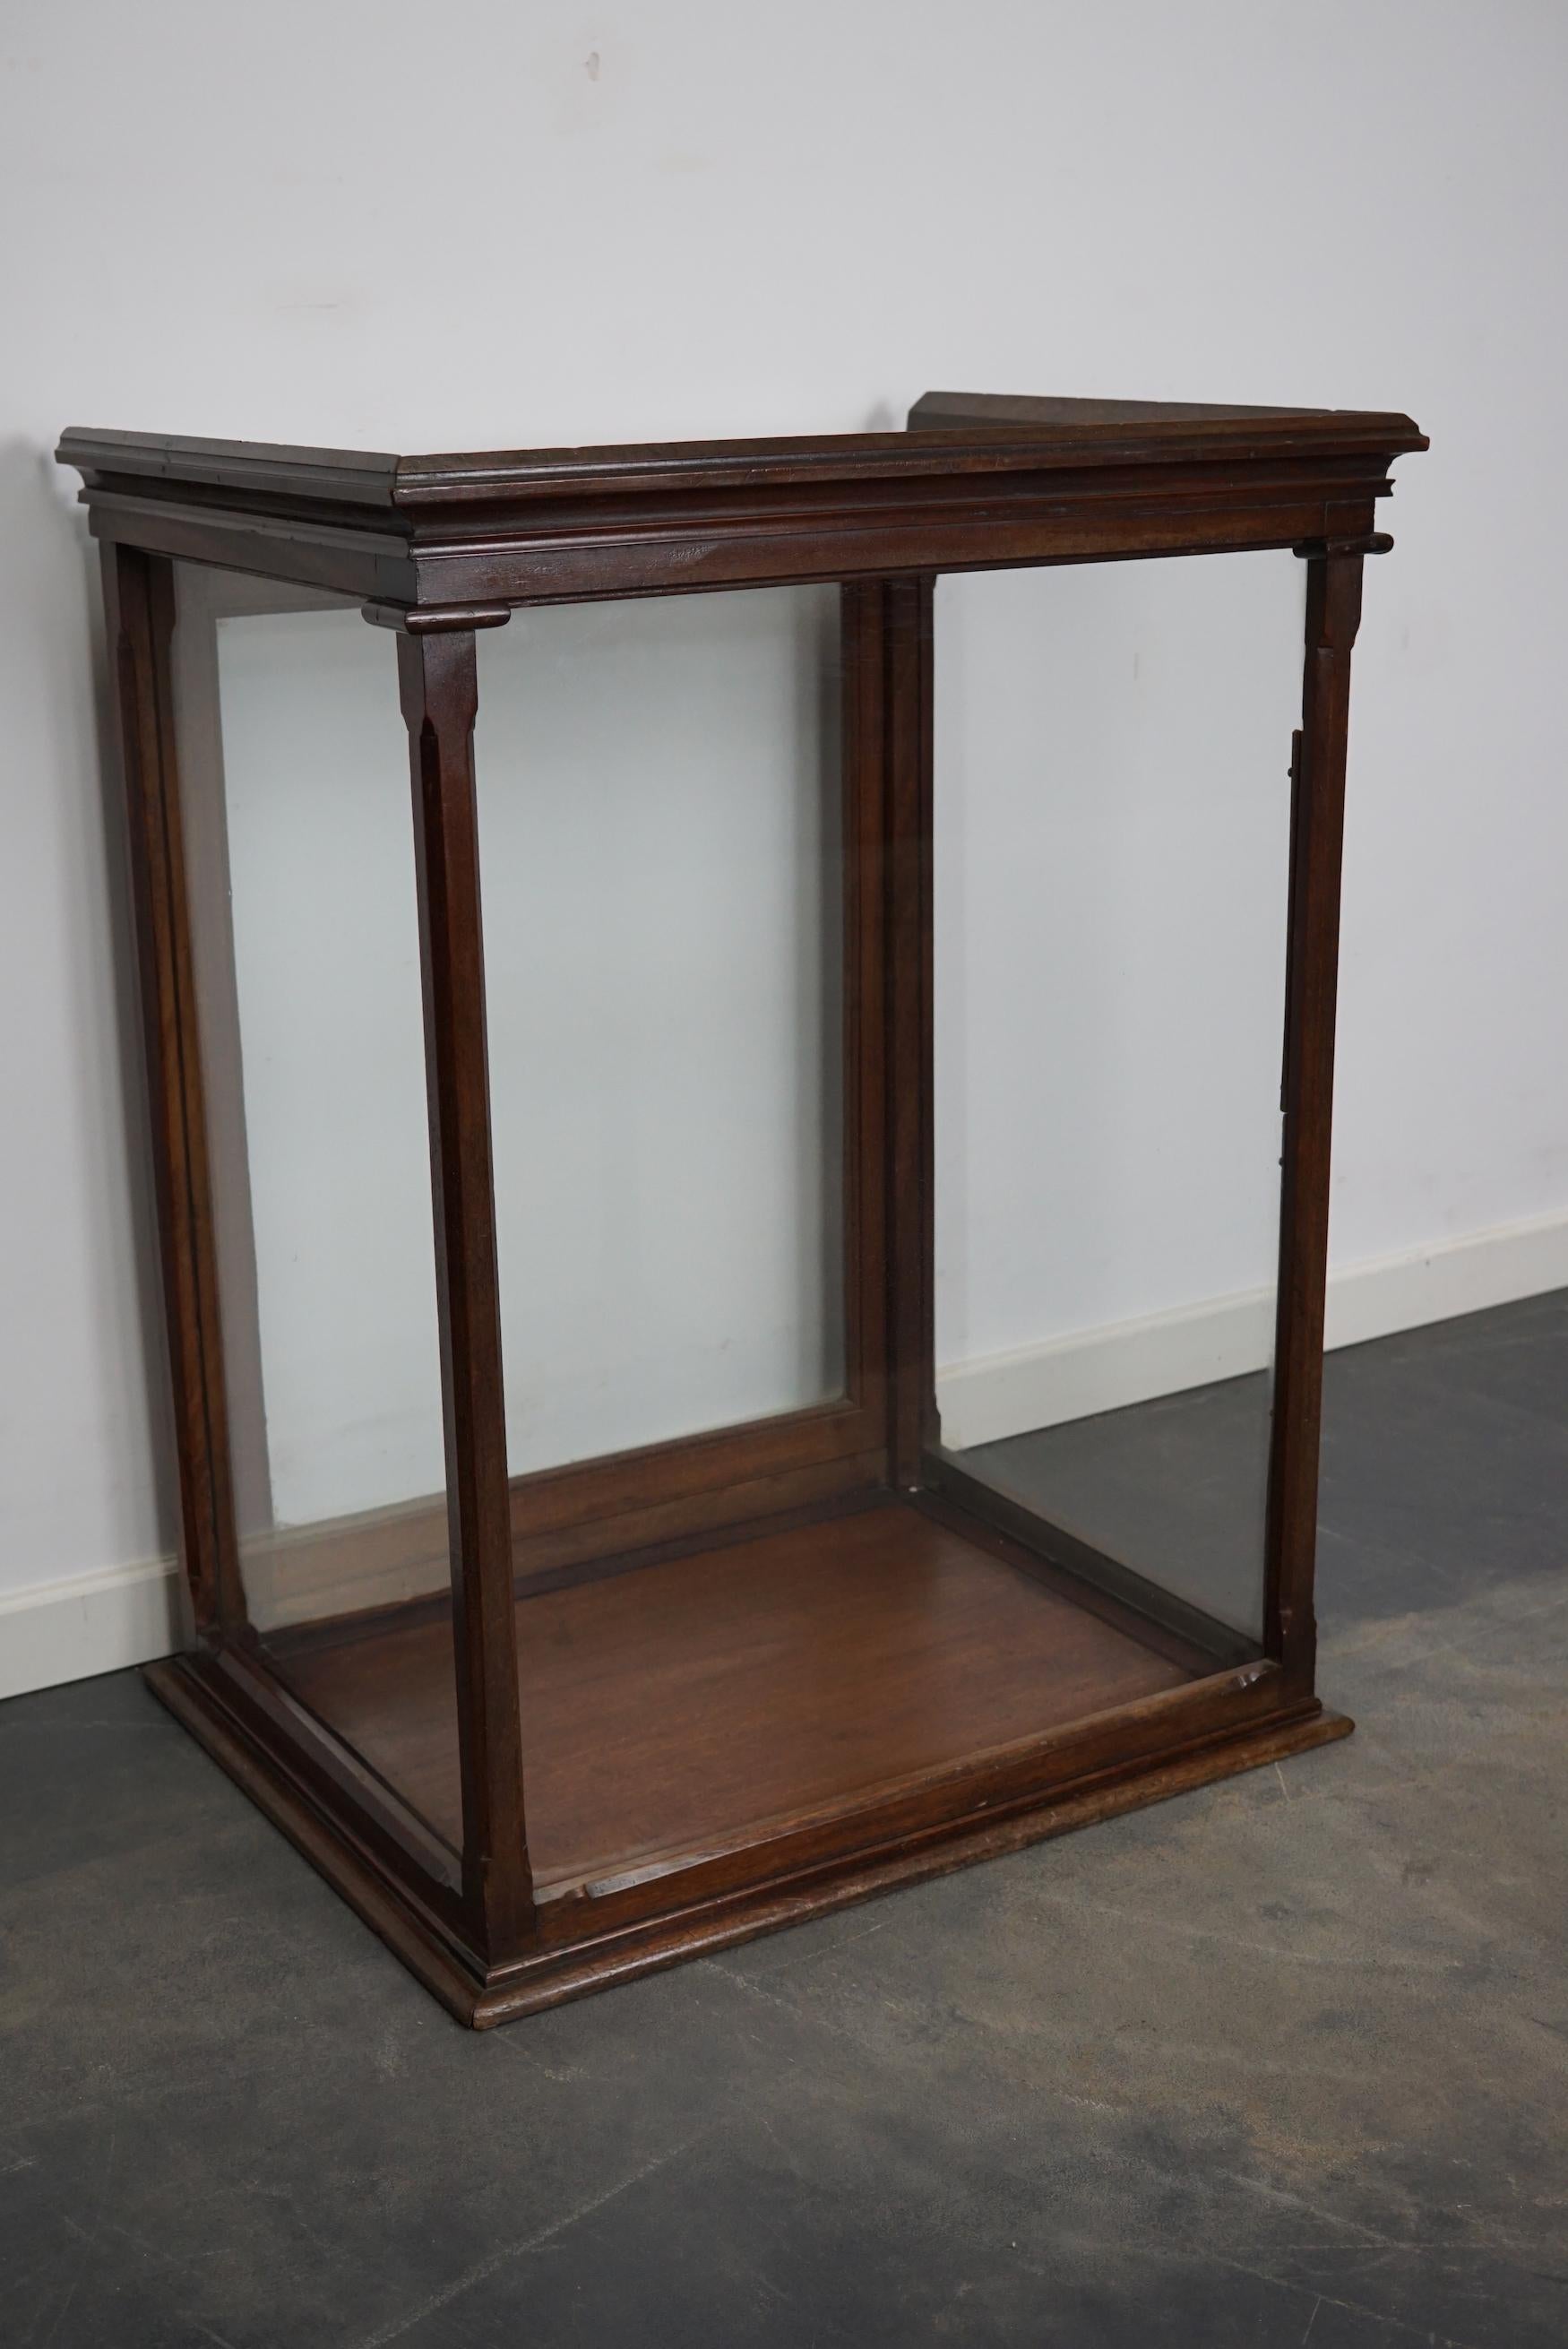 British Victorian Mahogany Museum / Shop Display Cabinet or Vitrine, Late 19th Century For Sale